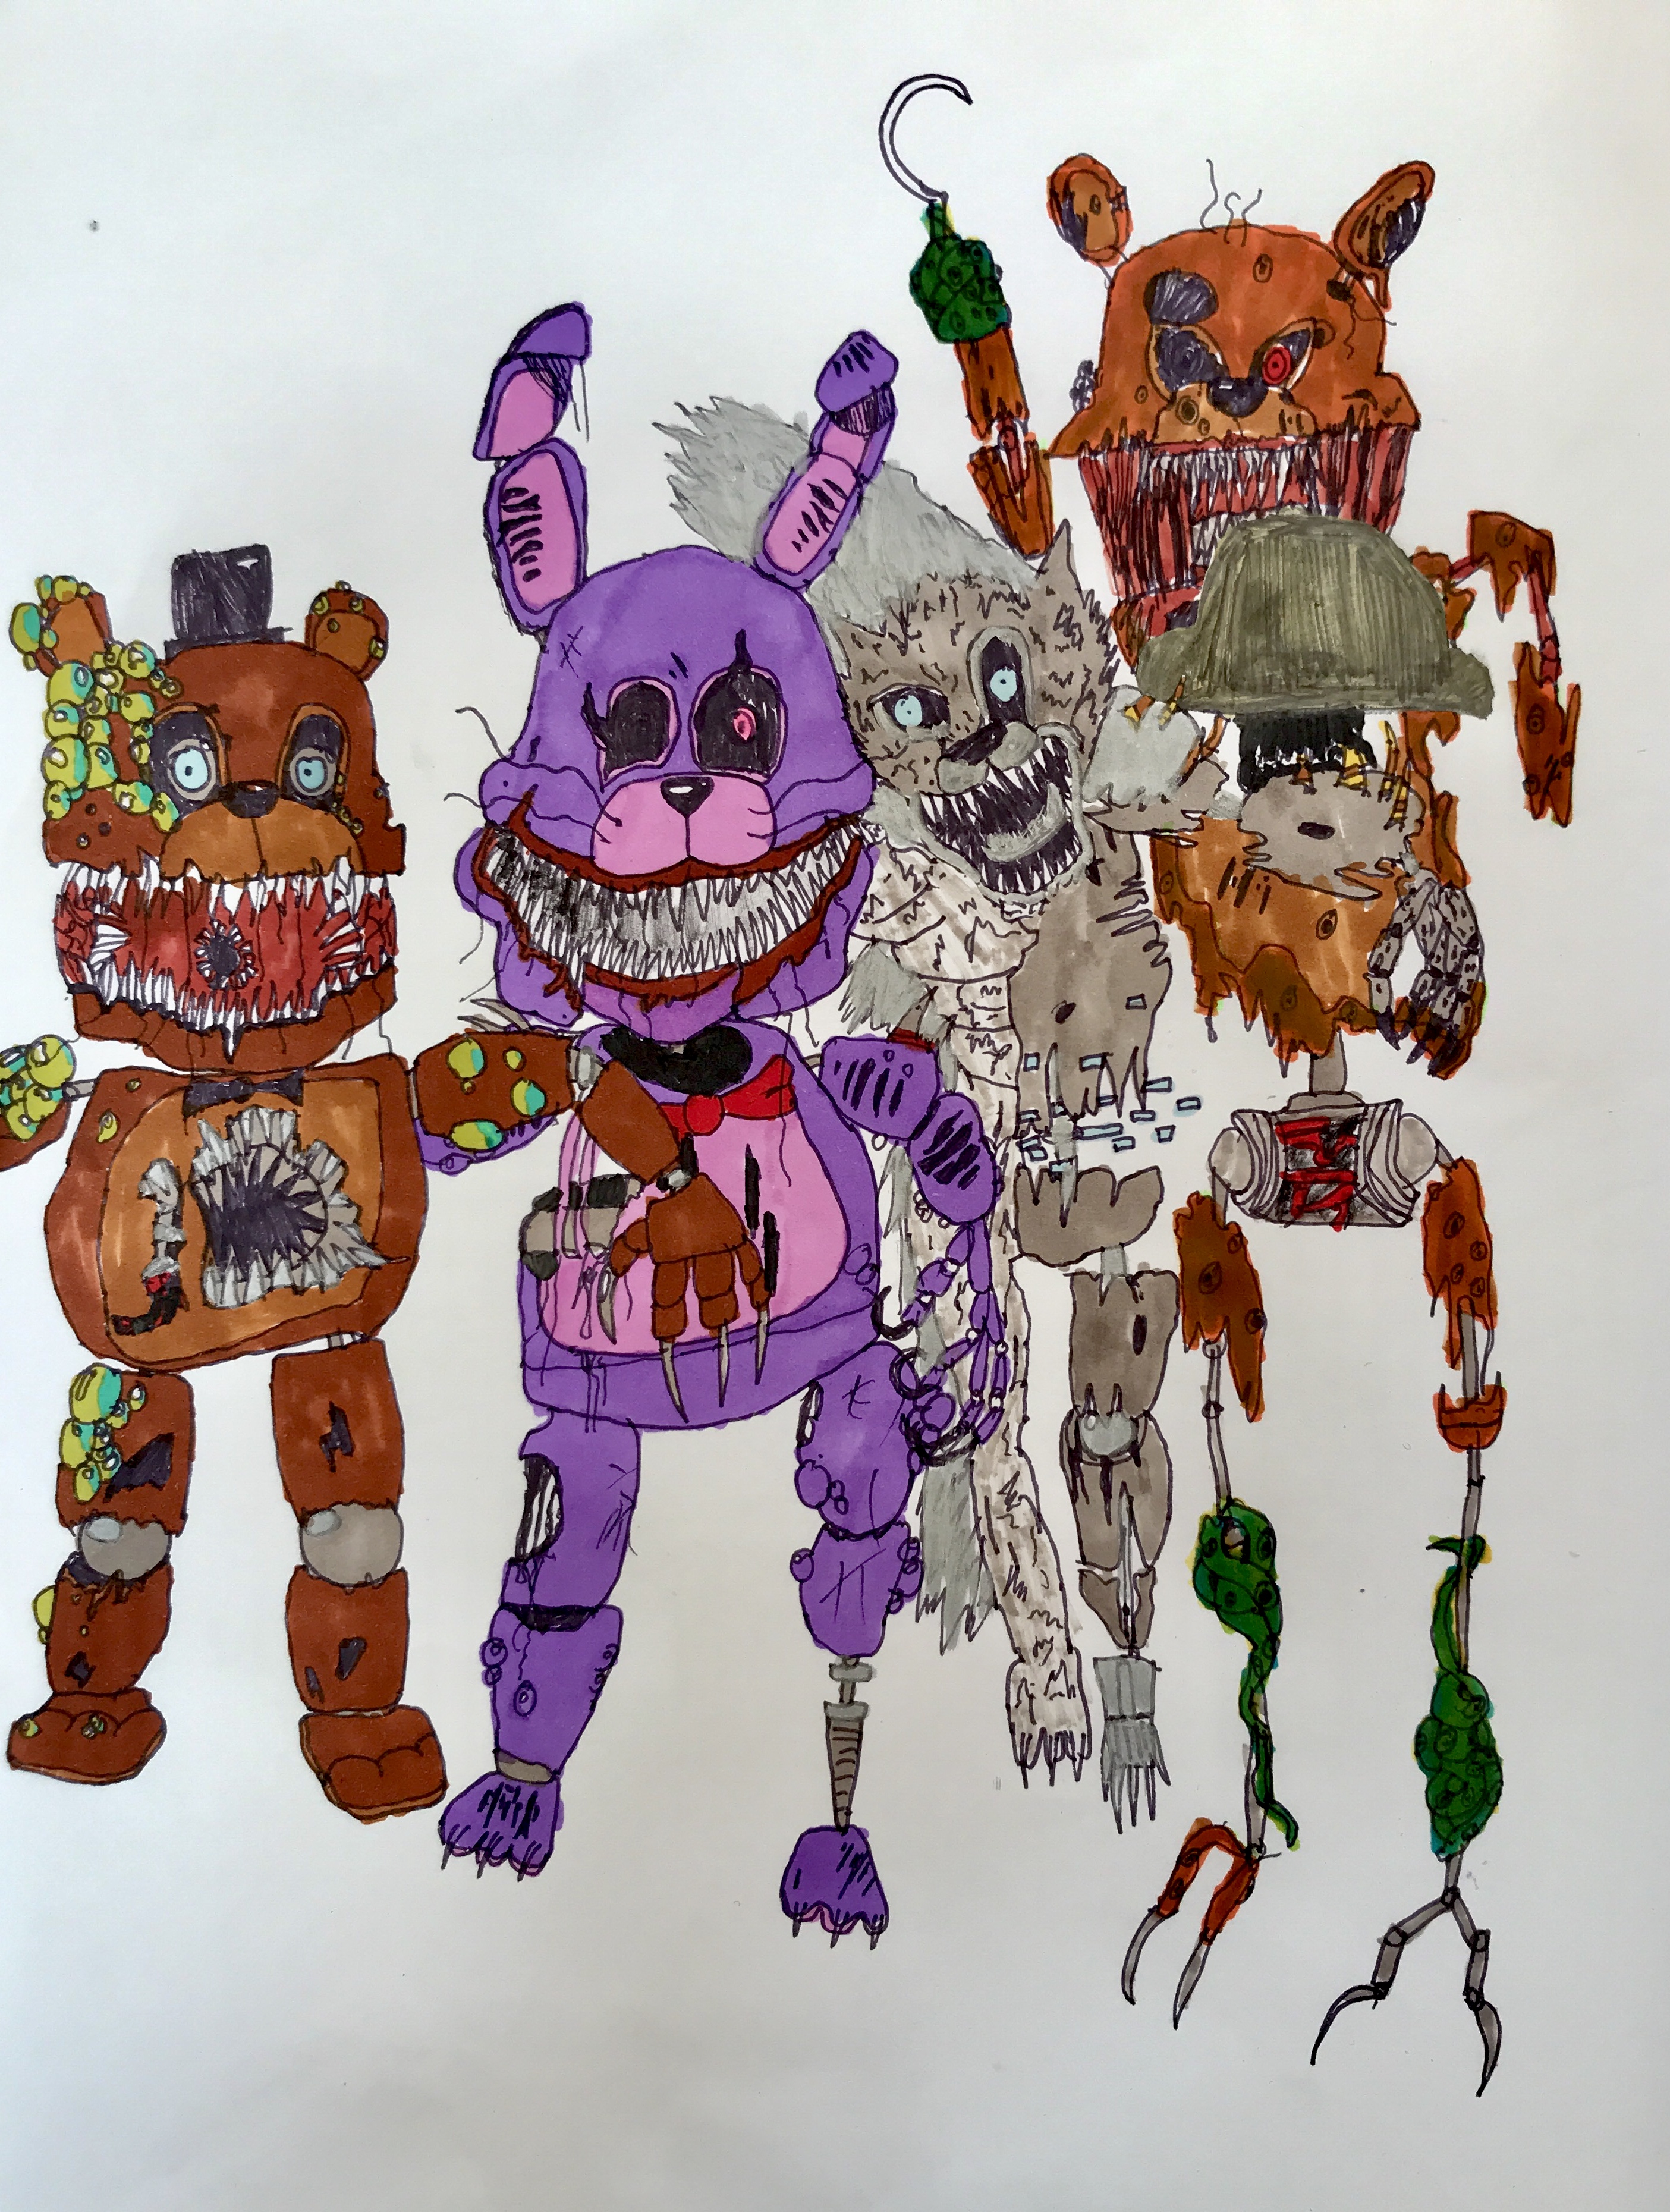 Five Nights At Freddy S Image The Twisted Ones HD Wallpaper And